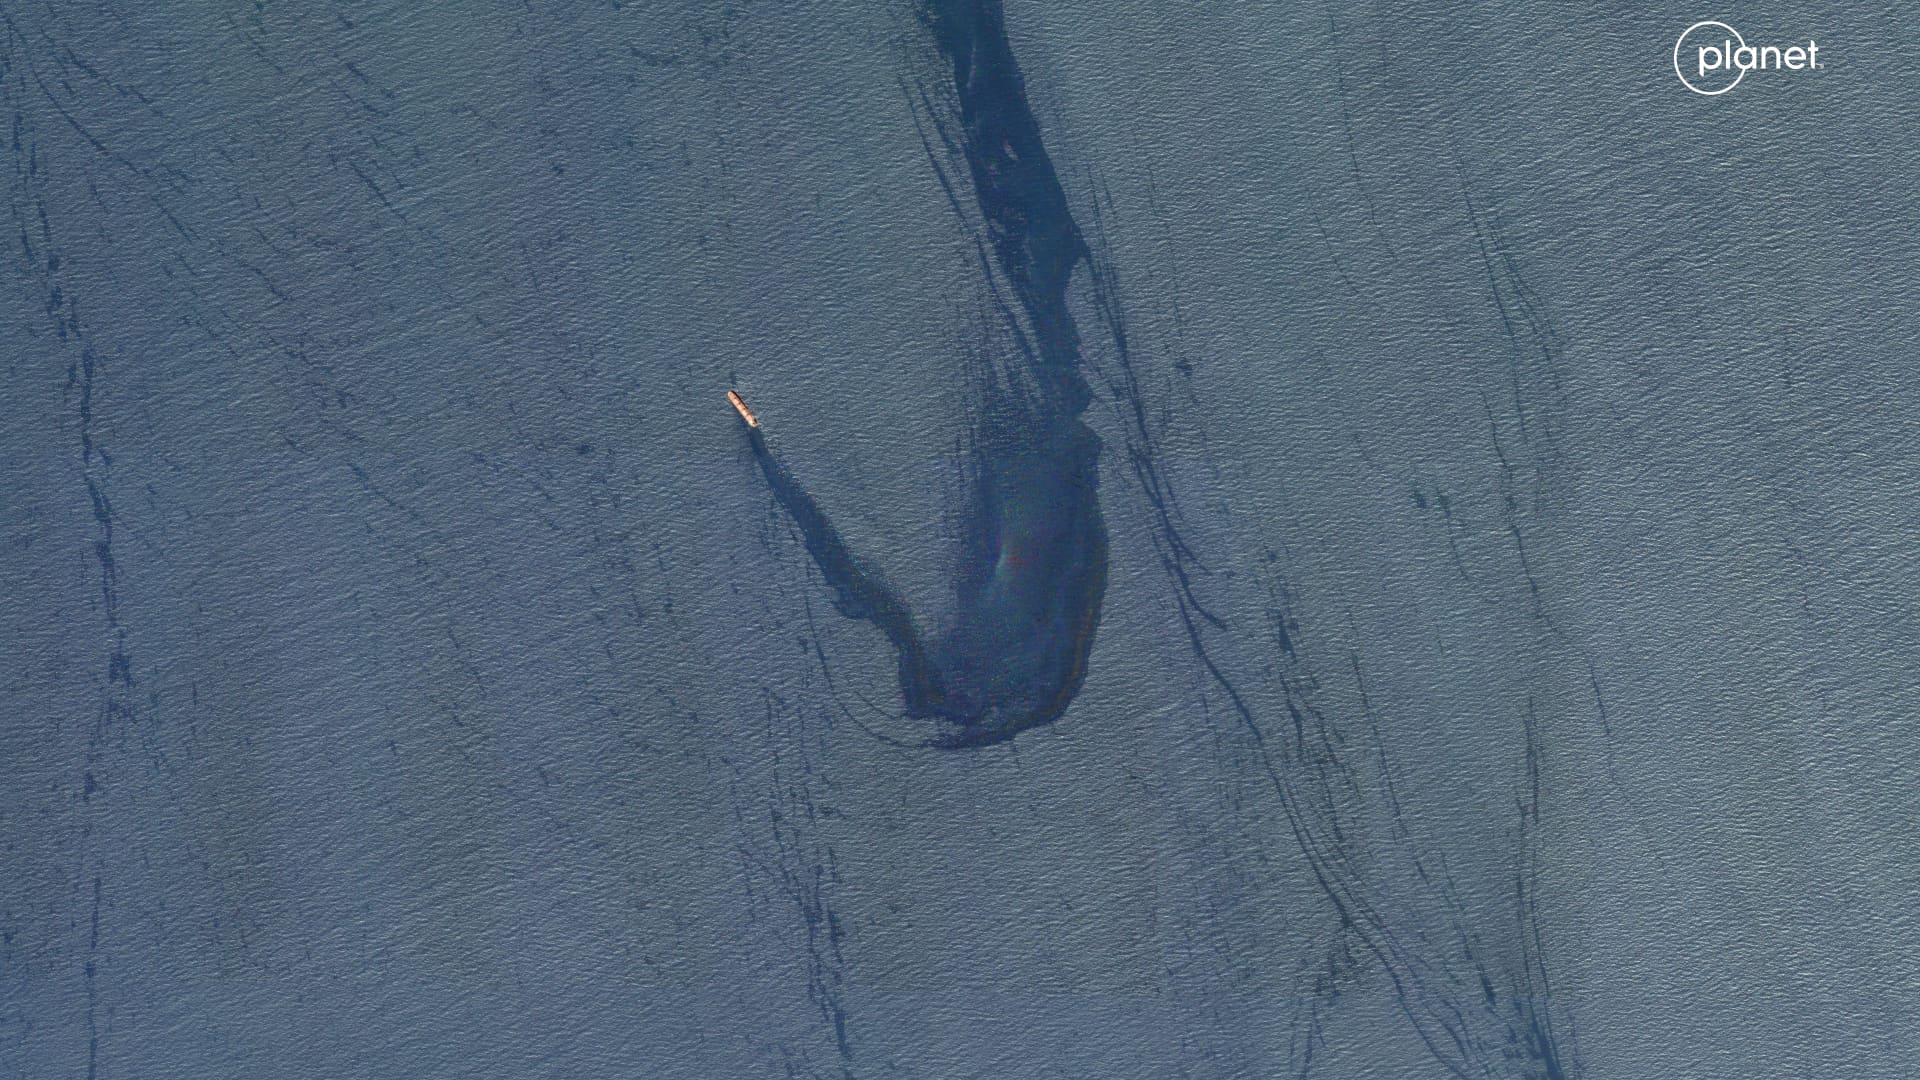 Satellite imagery captured by Planet Labs on Feb. 20 of oil slick in Red Sea after Houthi attack on Belize-flagged, UK-owned bulk carrier M/V Rubymar.